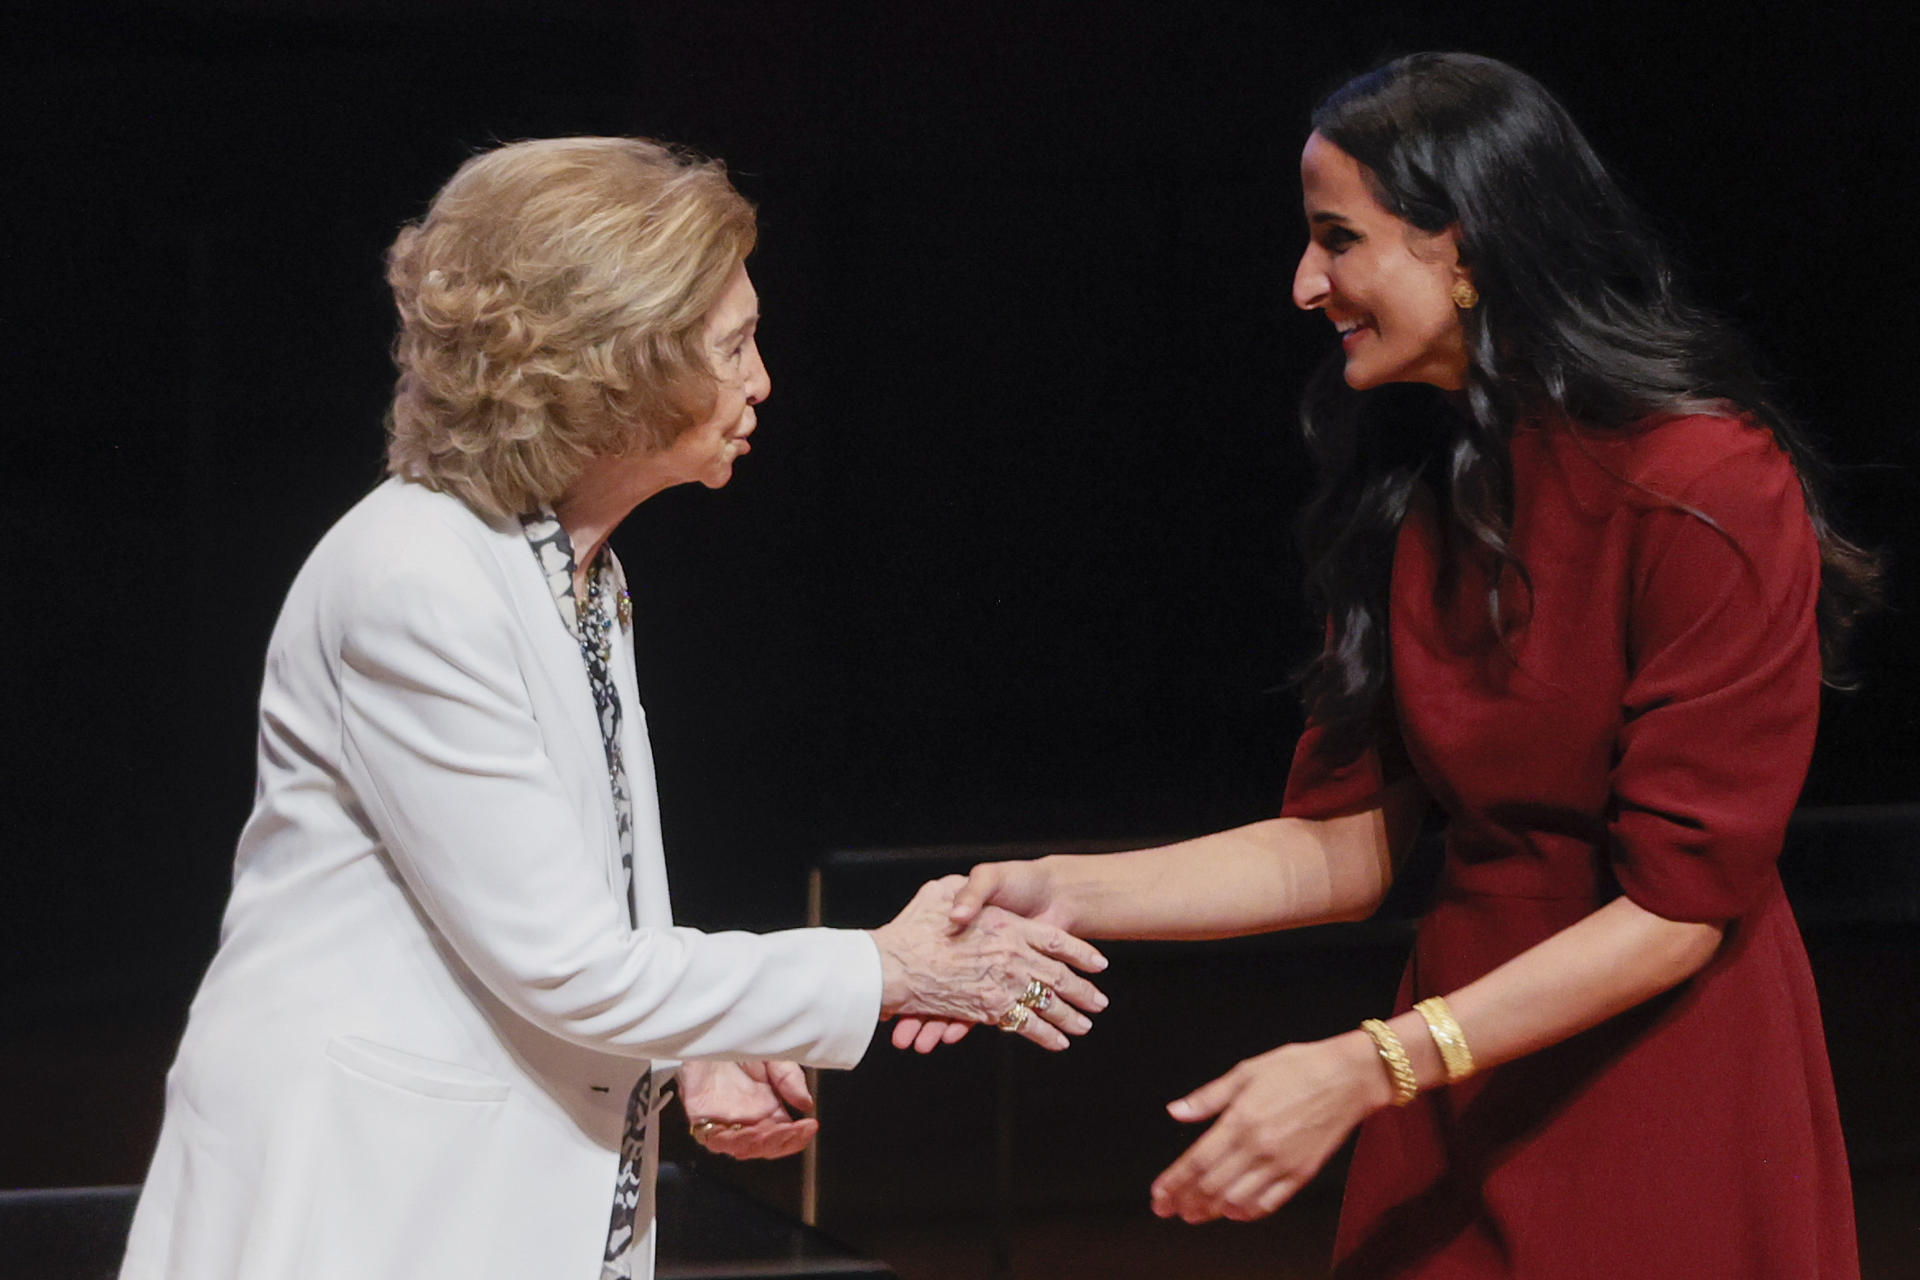 Spain's Queen Sofía (L) greets the vice president and CEO of the Qatar Foundation, Sheikha Hind bint Hamad Al Thani (R), during the closing ceremony and concert of the 2022-2023 academic year of the Reina Sofía School of Music at the Museo Nacional Centro de Arte Reina Sofía in Madrid, Spain, 20 June 2023. EFE/ Mariscal